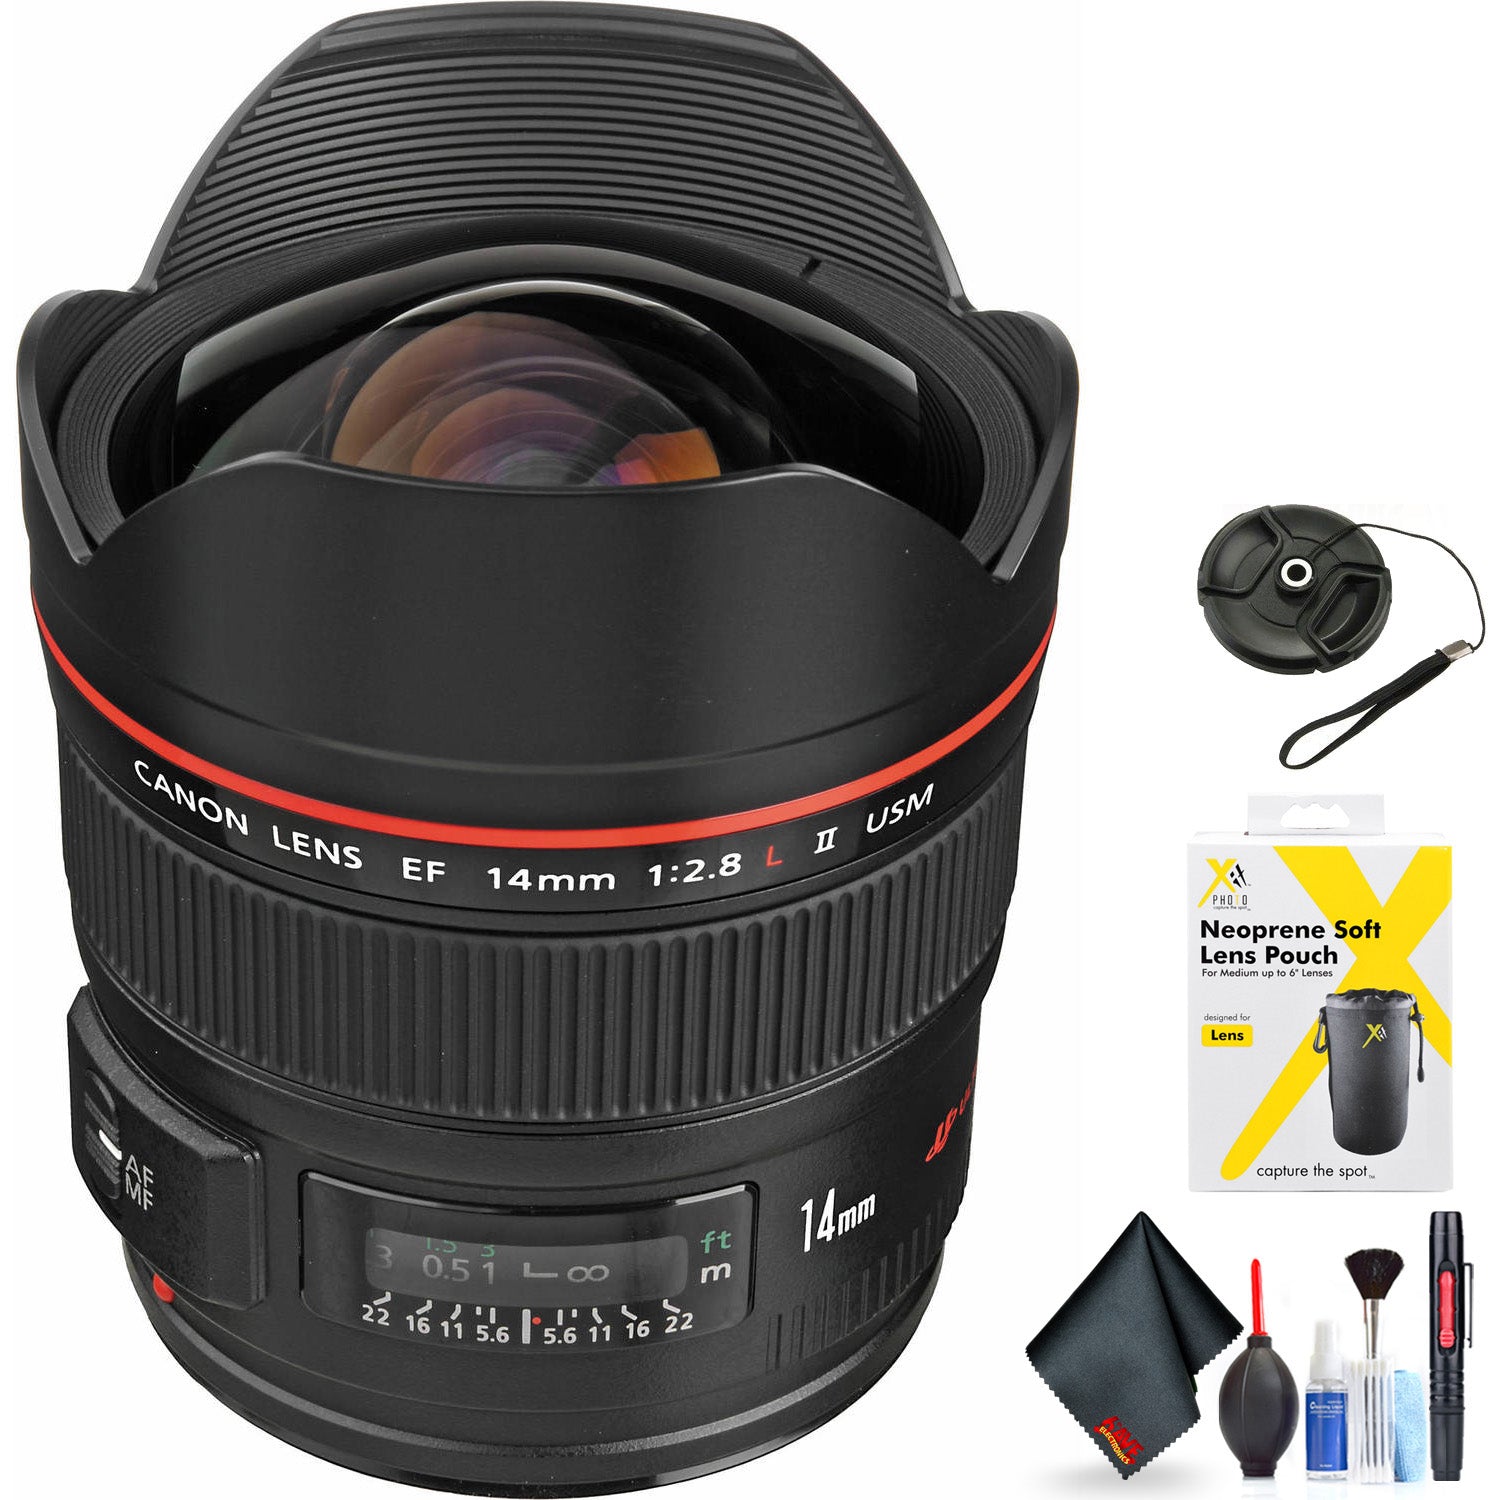 Canon EF 14mm f/2.8L II USM Lens for Canon EF Mount + Accessories (International Model with 2 Year Warranty)